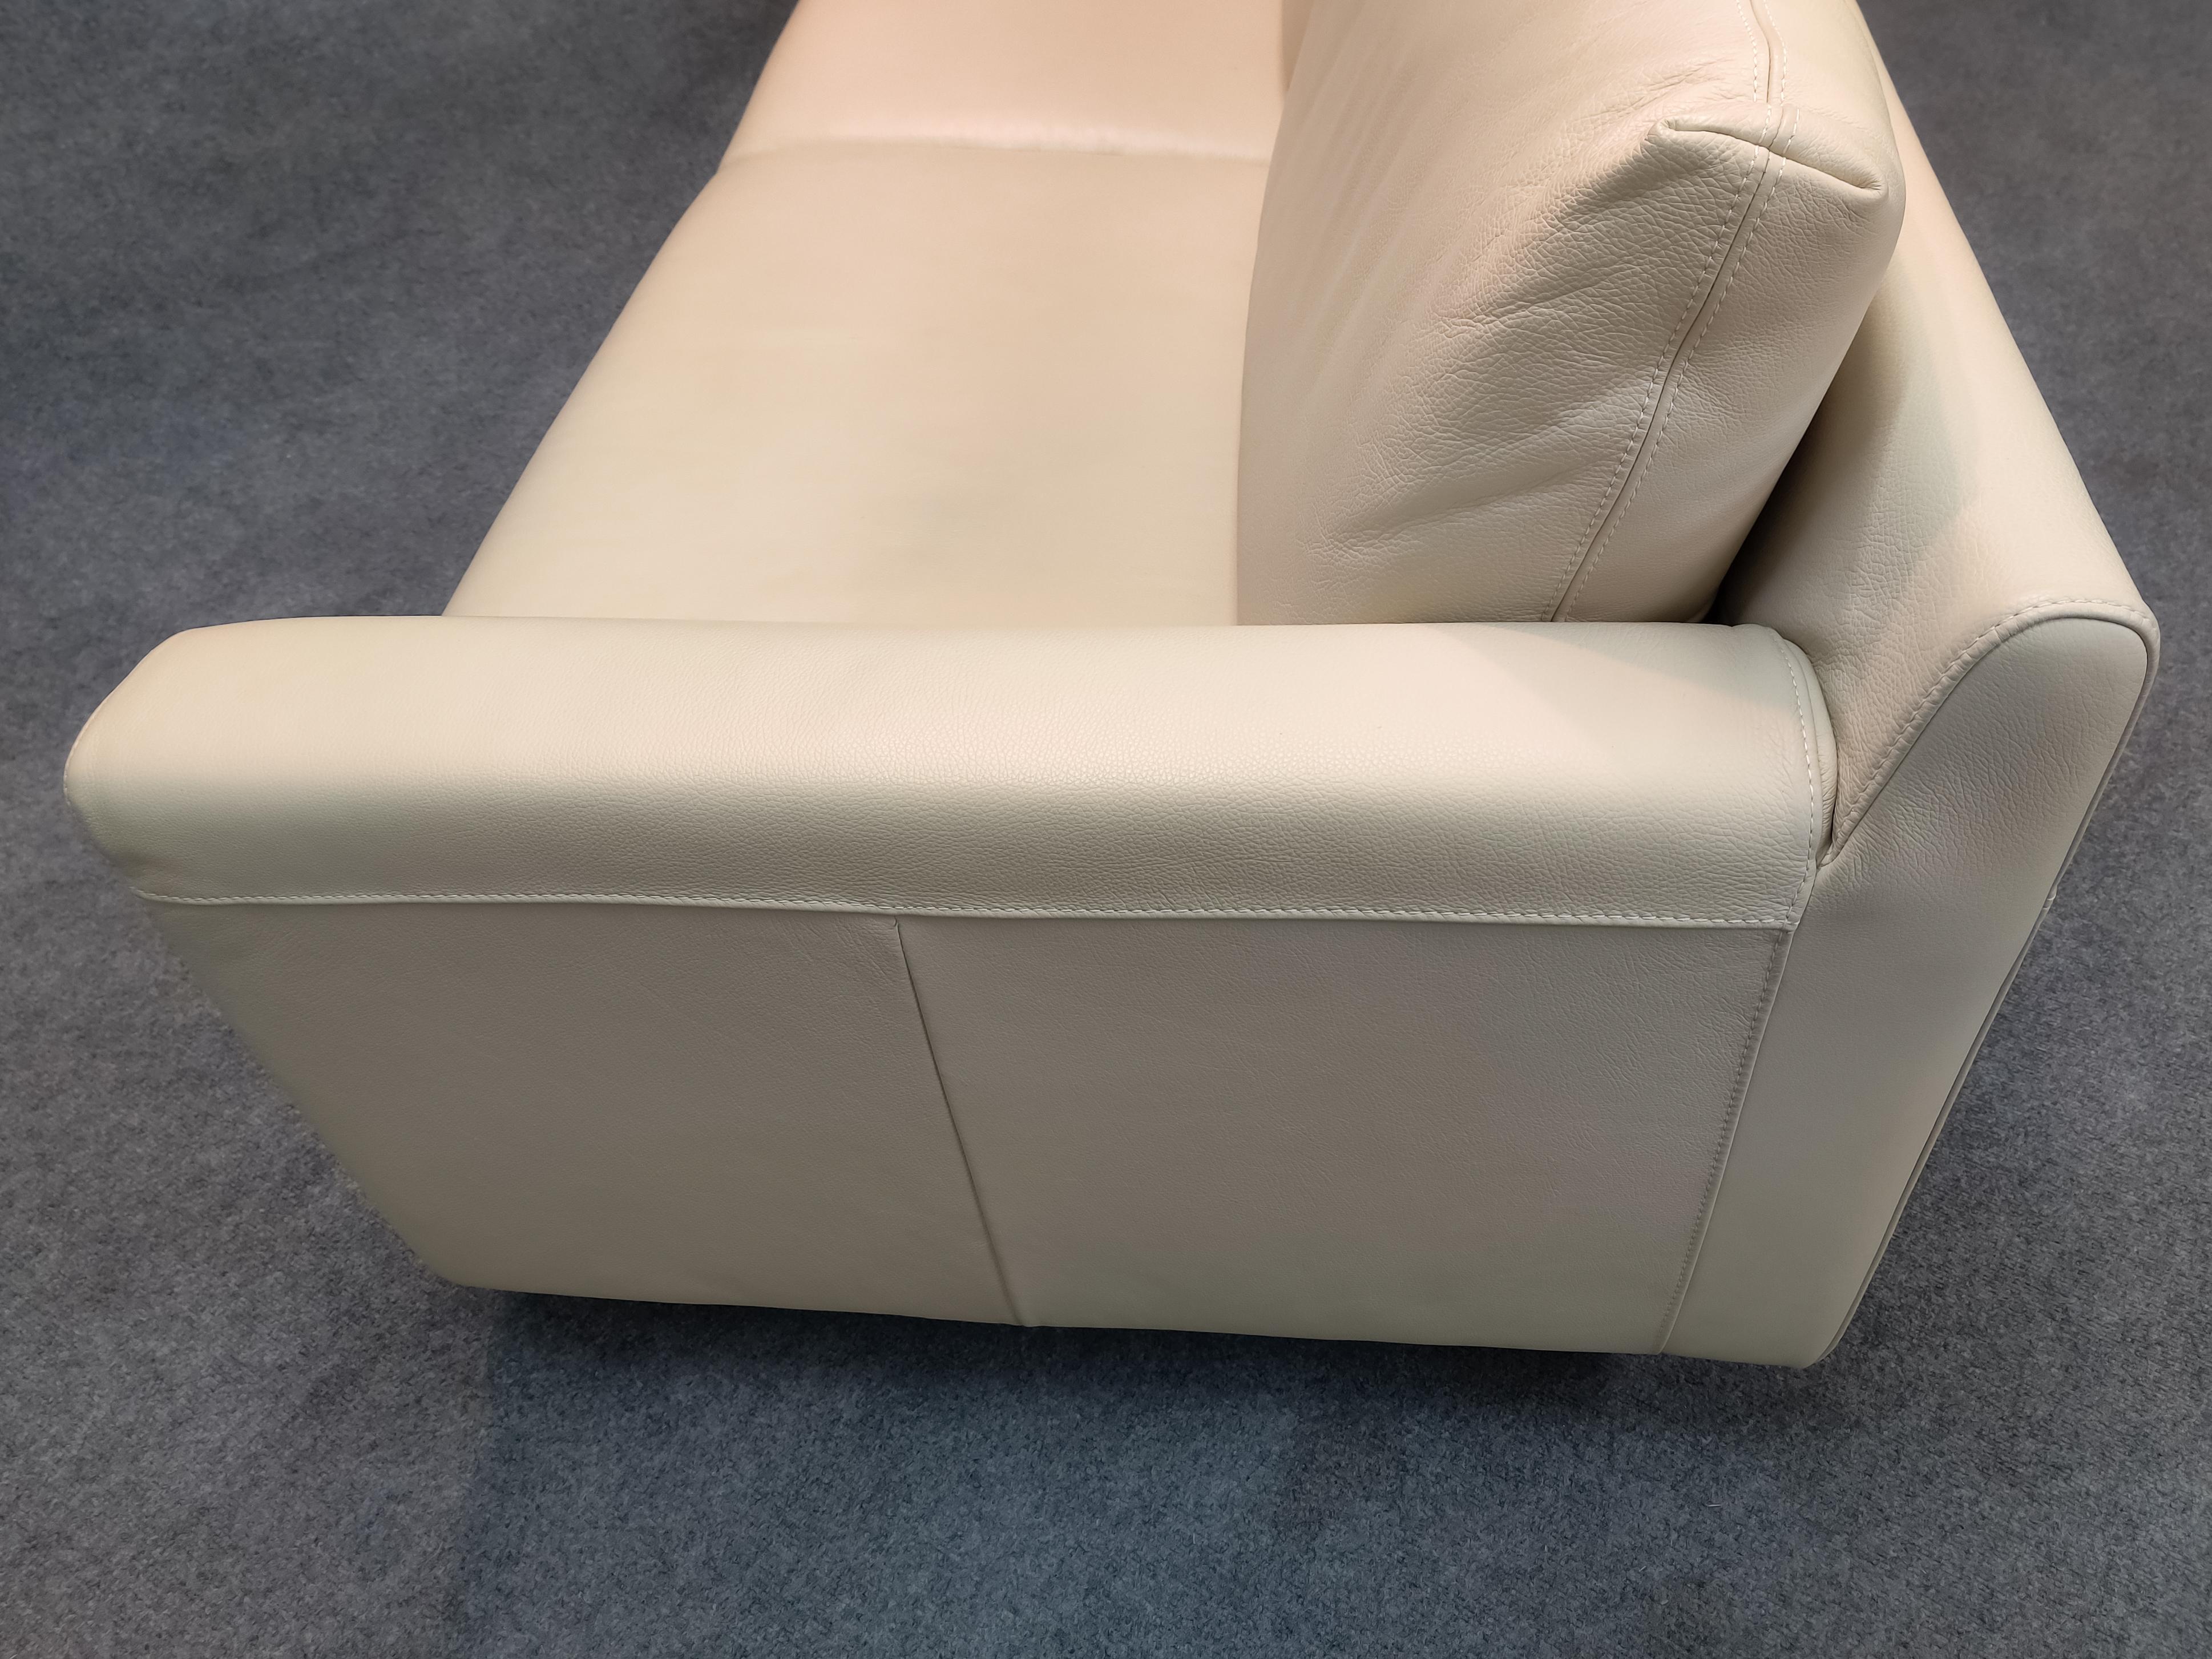 Post-Modern & Sleek Fine Top-Grain Off-White Leather Sofa by Nicoletti of Italy 4